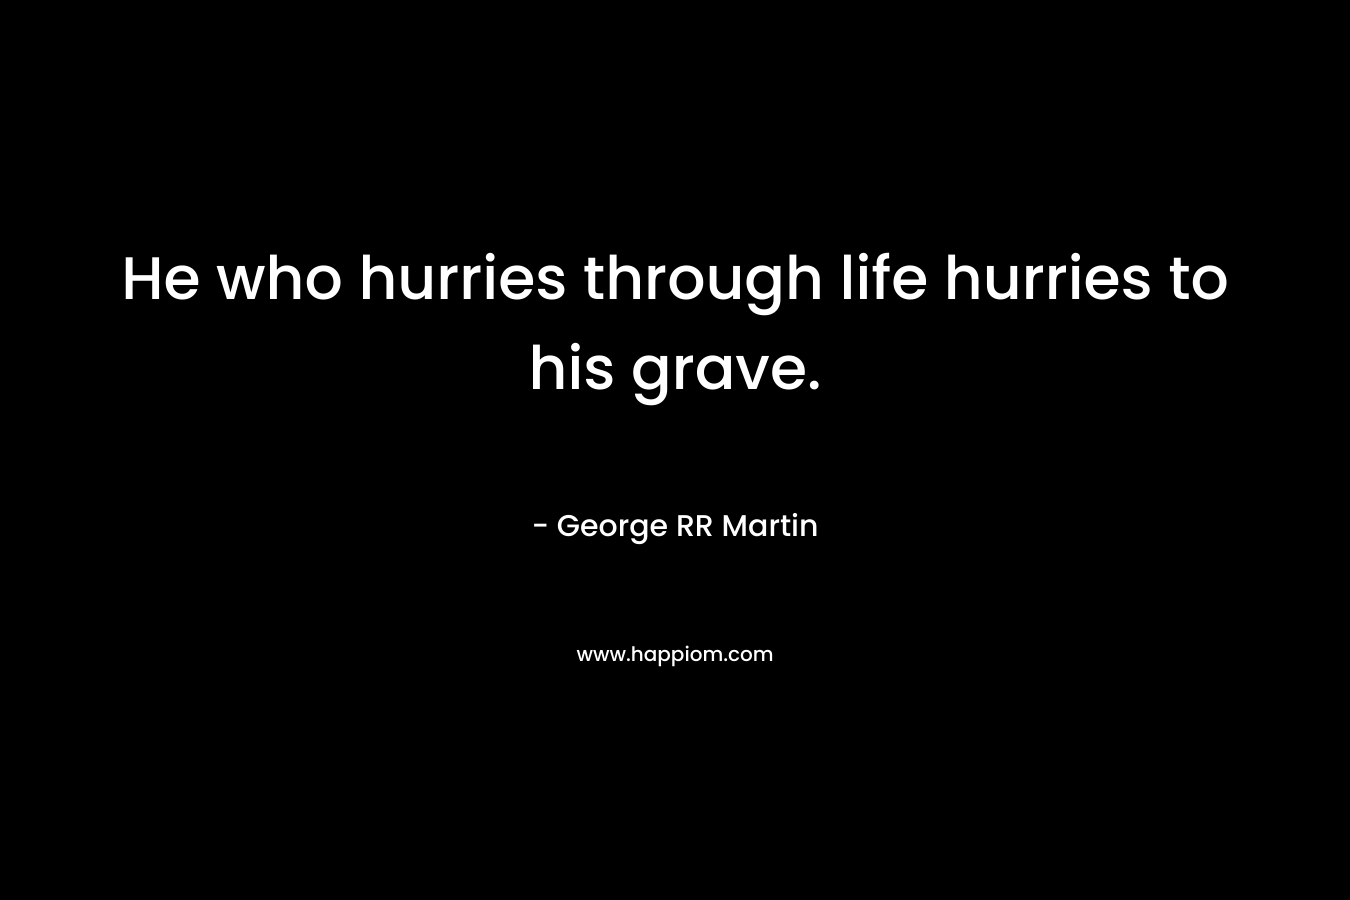 He who hurries through life hurries to his grave. – George RR Martin